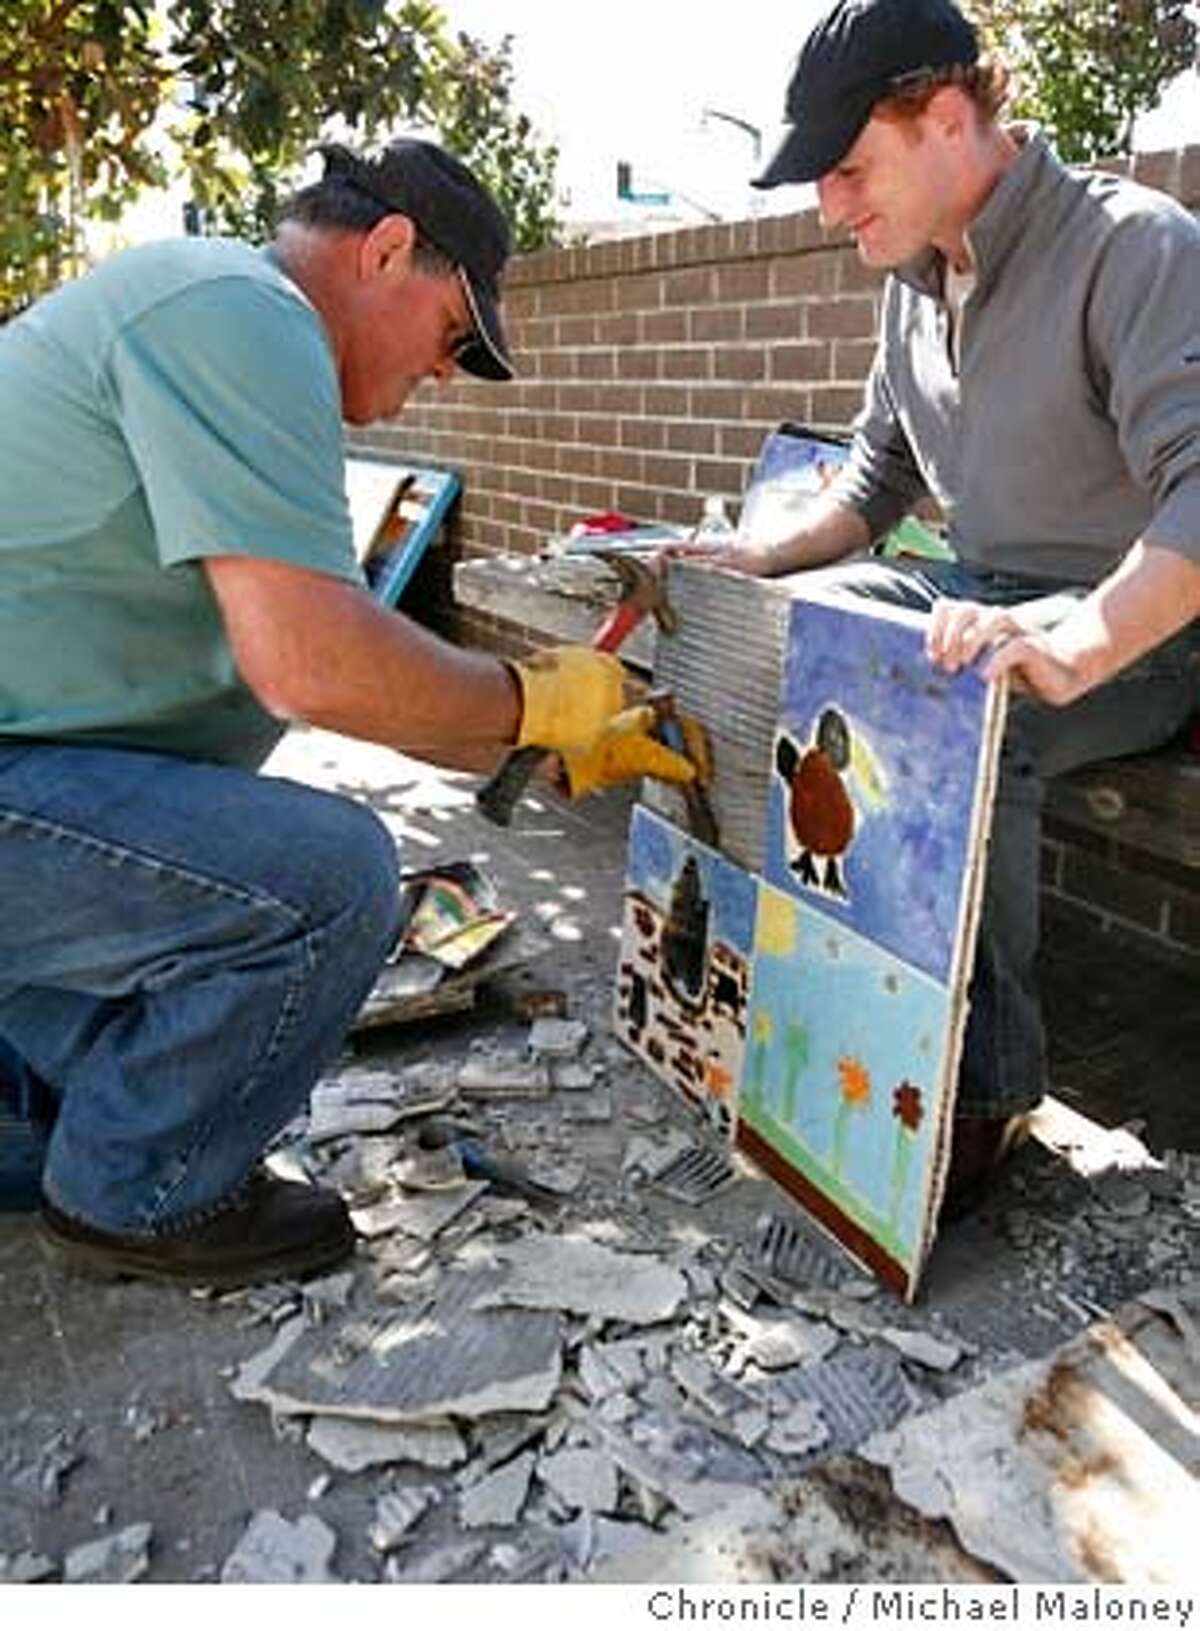 Rick Story (left) and Patrick Curran of the SWA Group carefully pry off tiles that were used in garden beds and are now to be recycled as table tops in the Bayview Opera House. On Friday Oct. 19, a ceremony will celebrate a public-private partnership creating a major facelift for one of San Francisco�s historic landmarks, the Bayview Opera House. Locally-based SWA Group, a landscape architecture firm is leading a pro-bono implementation in celebration of the firm�s 50th anniversary. The community celebration on Friday culminates a two-day transformation of the Bayview Opera House grounds on Third Street in San Francisco. Photo taken on 10/18/07. Photo by Michael Maloney / San Francisco Chronicle ***Rick Story, Patrick Curran MANDATORY CREDIT FOR PHOTOG AND SF CHRONICLE/NO SALES-MAGS OUT